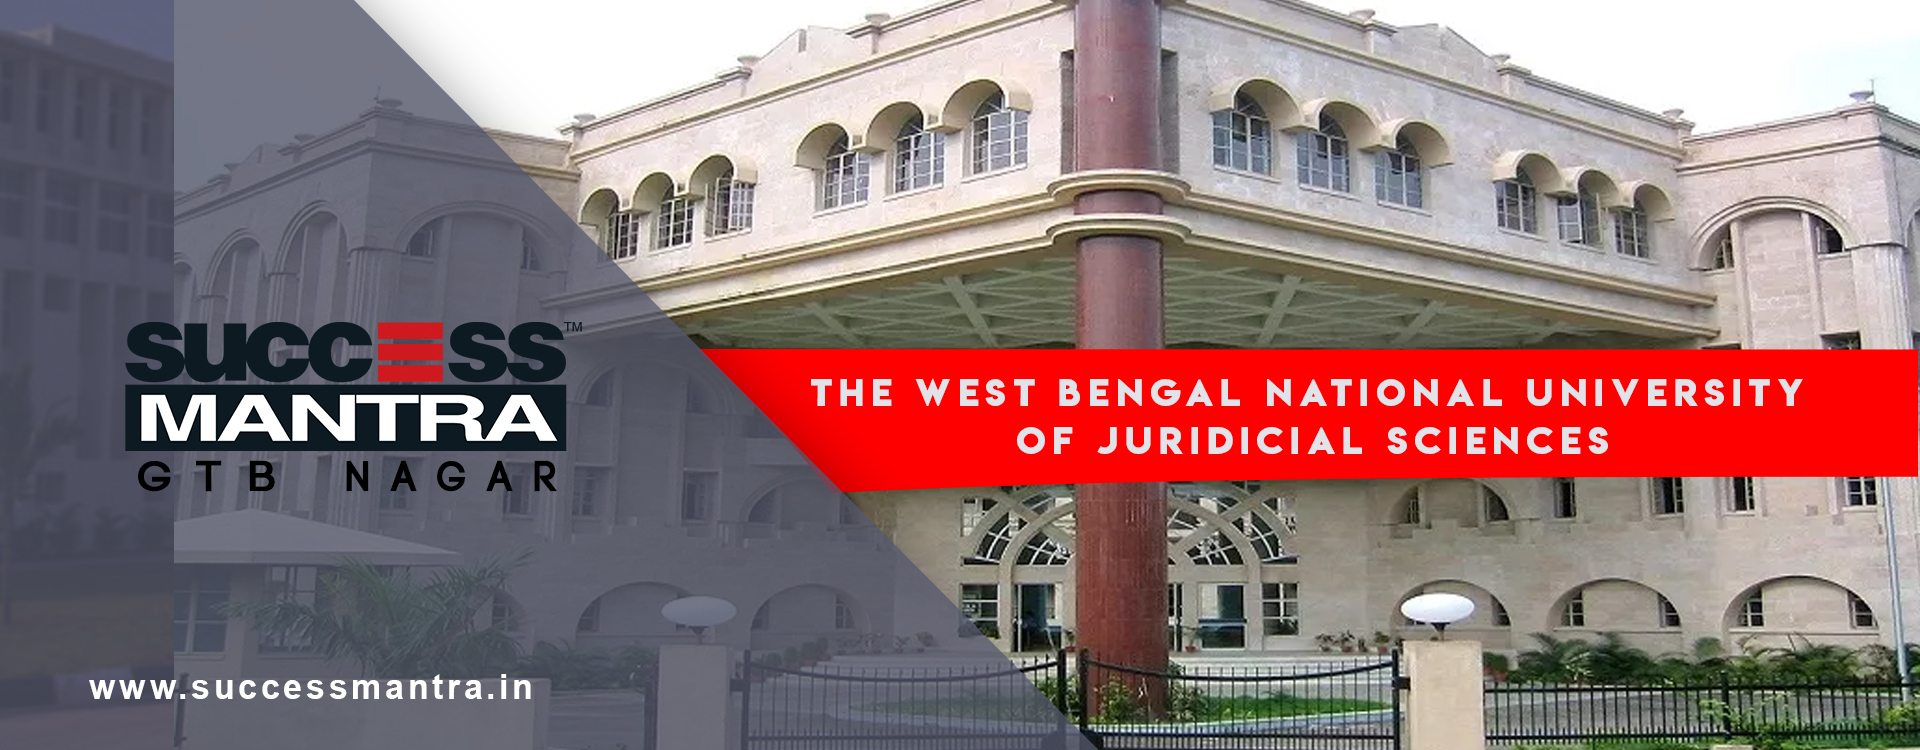  THE WEST BENGAL NATIONAL UNIVERSITY OF JURIDICAL SCIENCES 